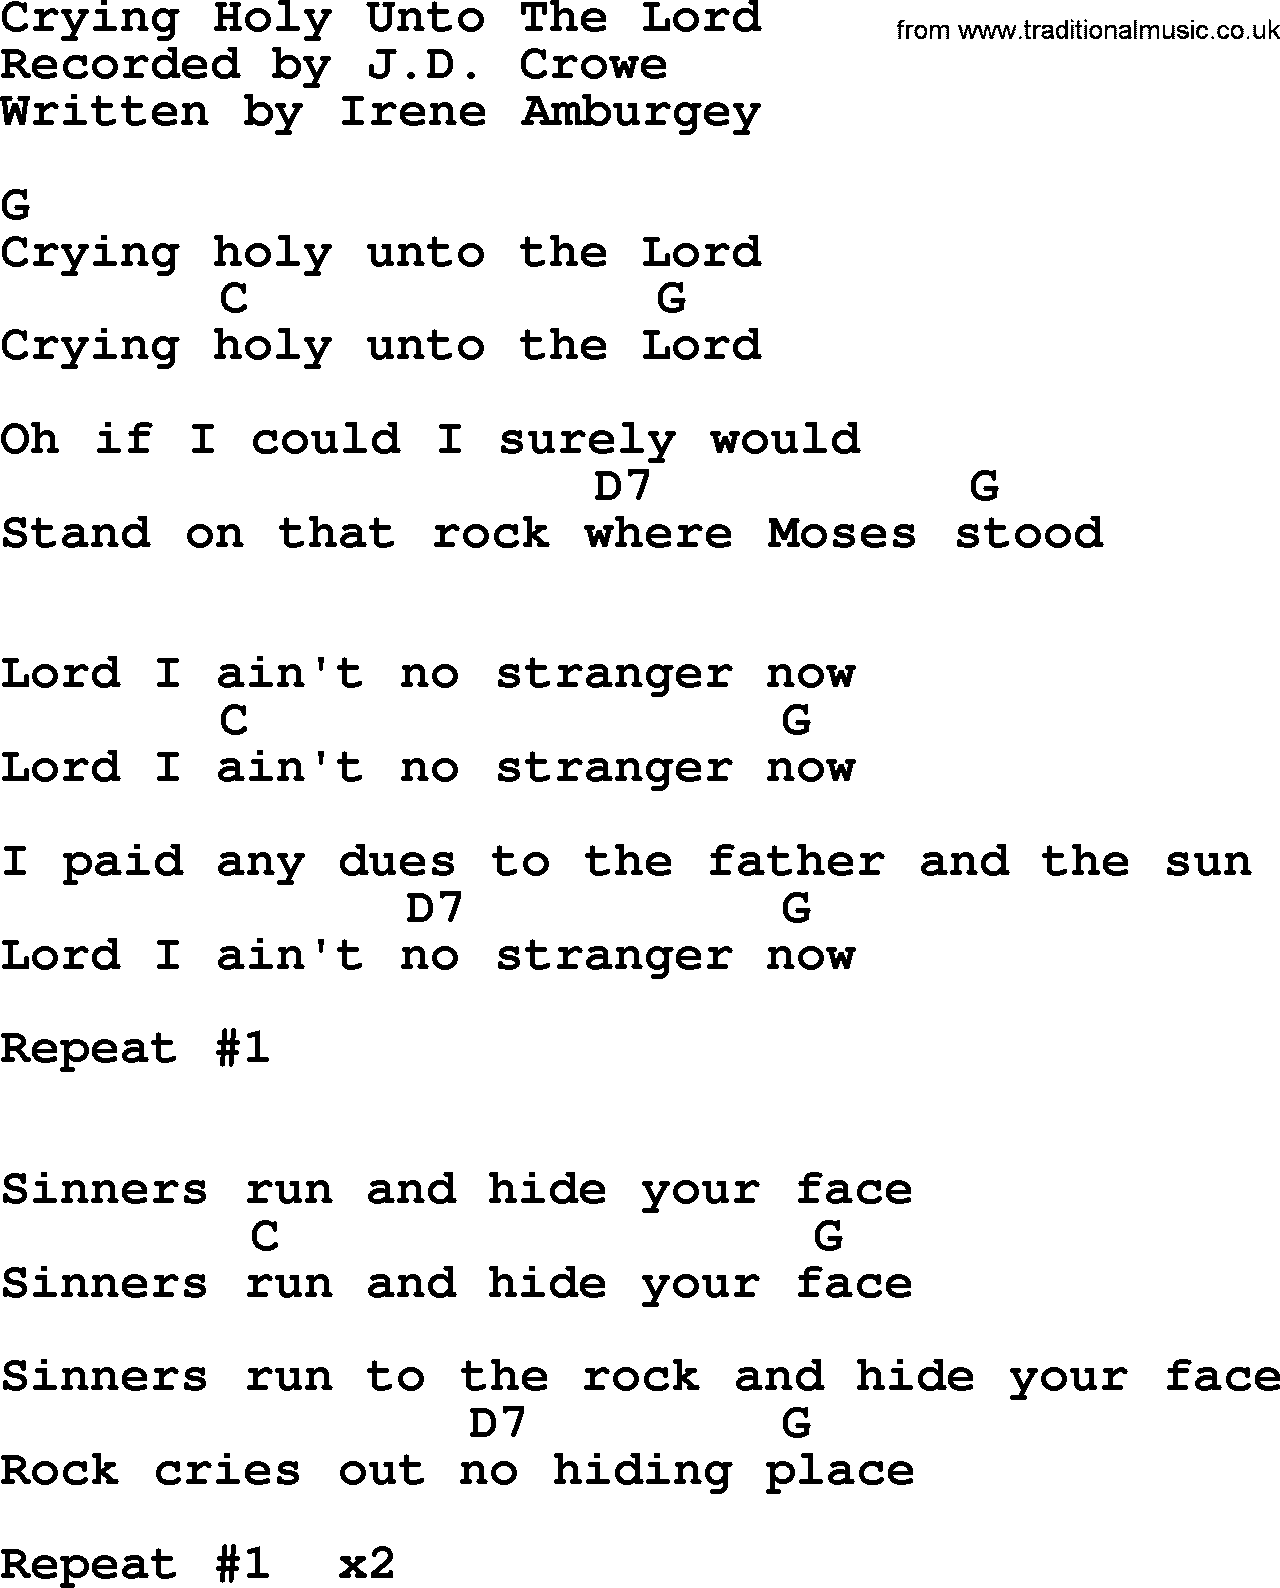 Bluegrass song: Crying Holy Unto The Lord, lyrics and chords